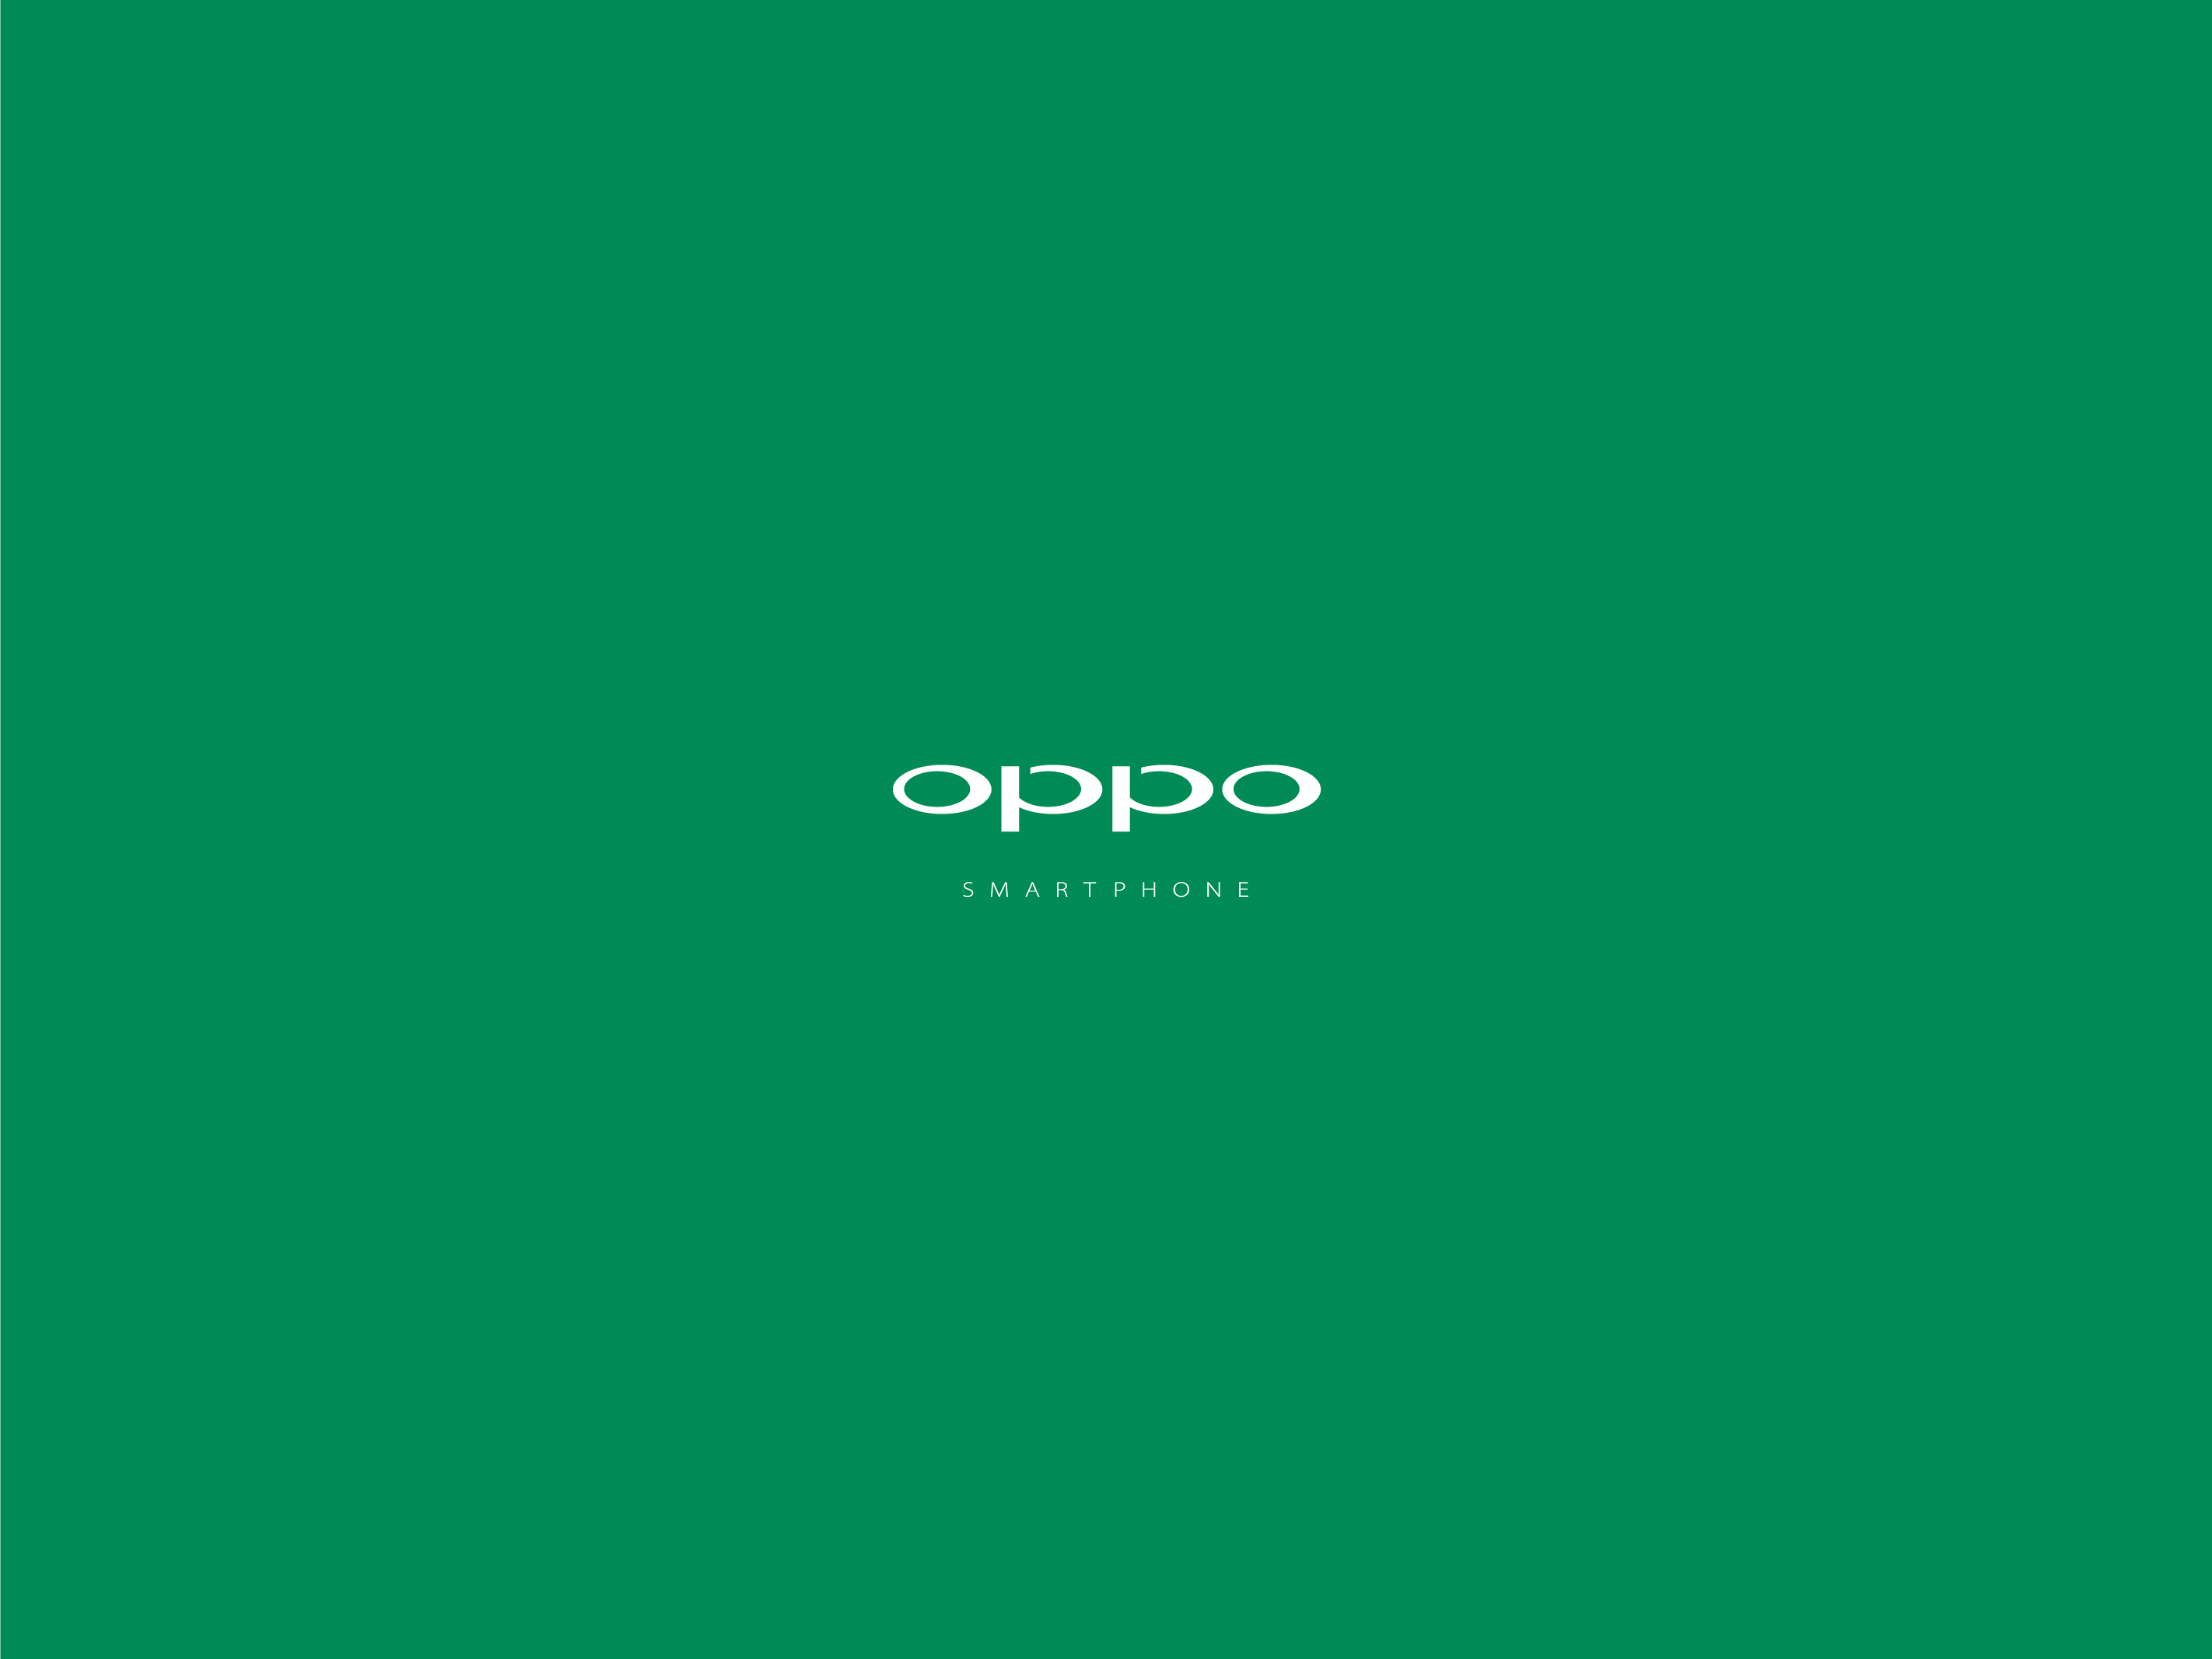 Smartphone Oppo Logo - Oppo R The Edge to Edge Display Smartphone Is Coming On May